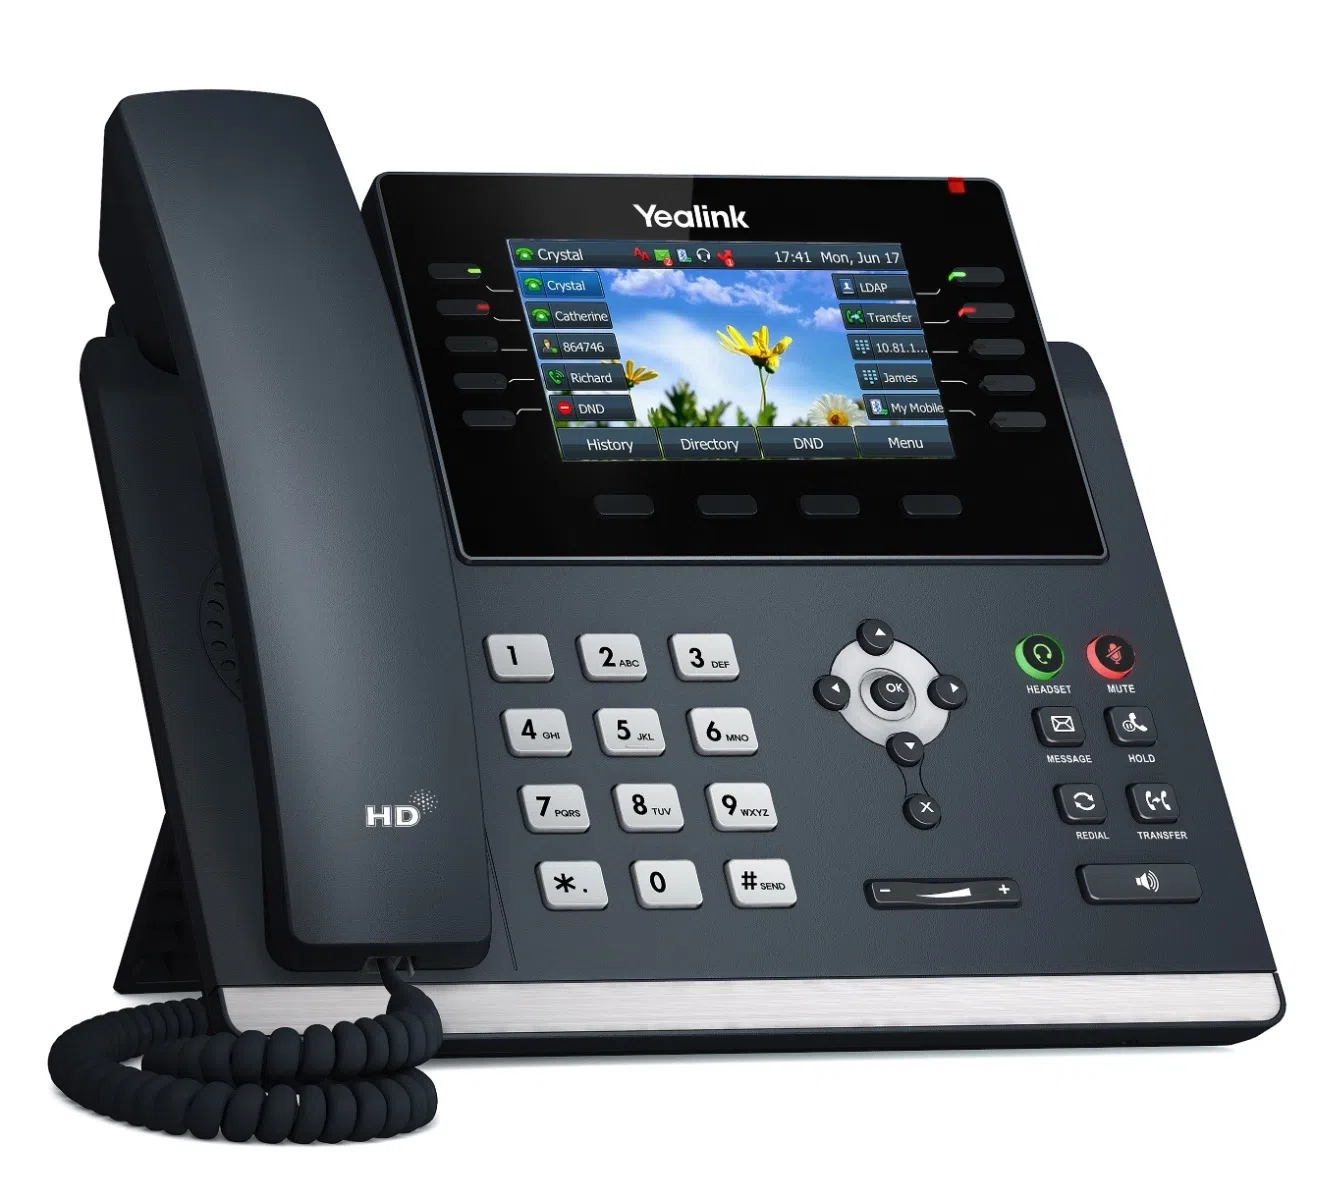 What's the MSRP for the product 'Yealink SIP-T46U IP Phone 1301203' or Yealink t46u?